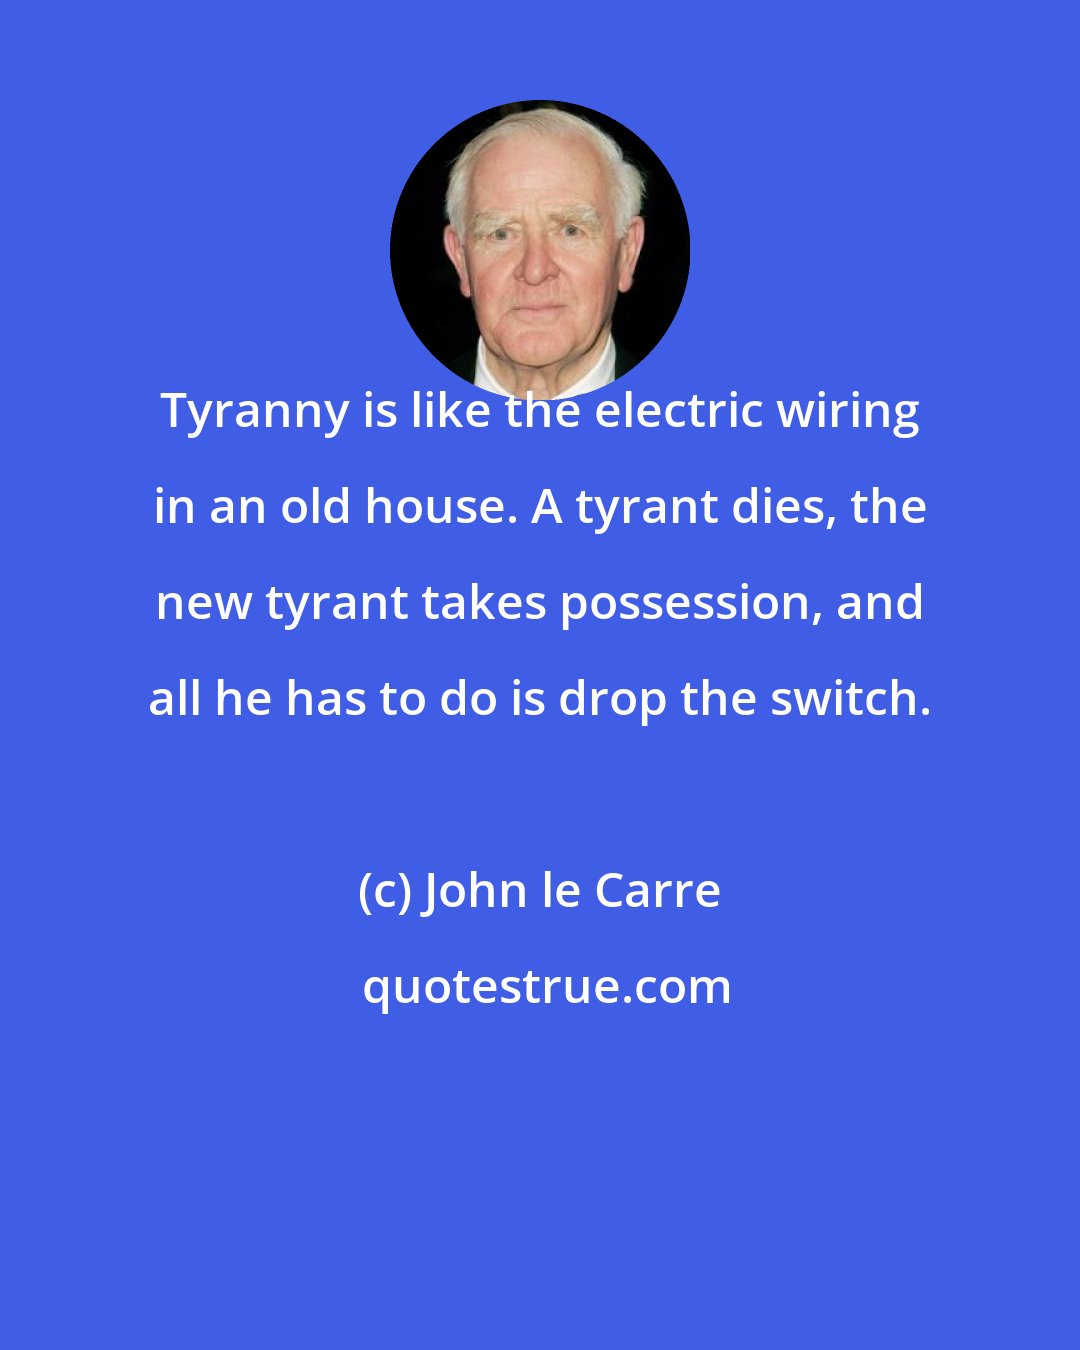 John le Carre: Tyranny is like the electric wiring in an old house. A tyrant dies, the new tyrant takes possession, and all he has to do is drop the switch.